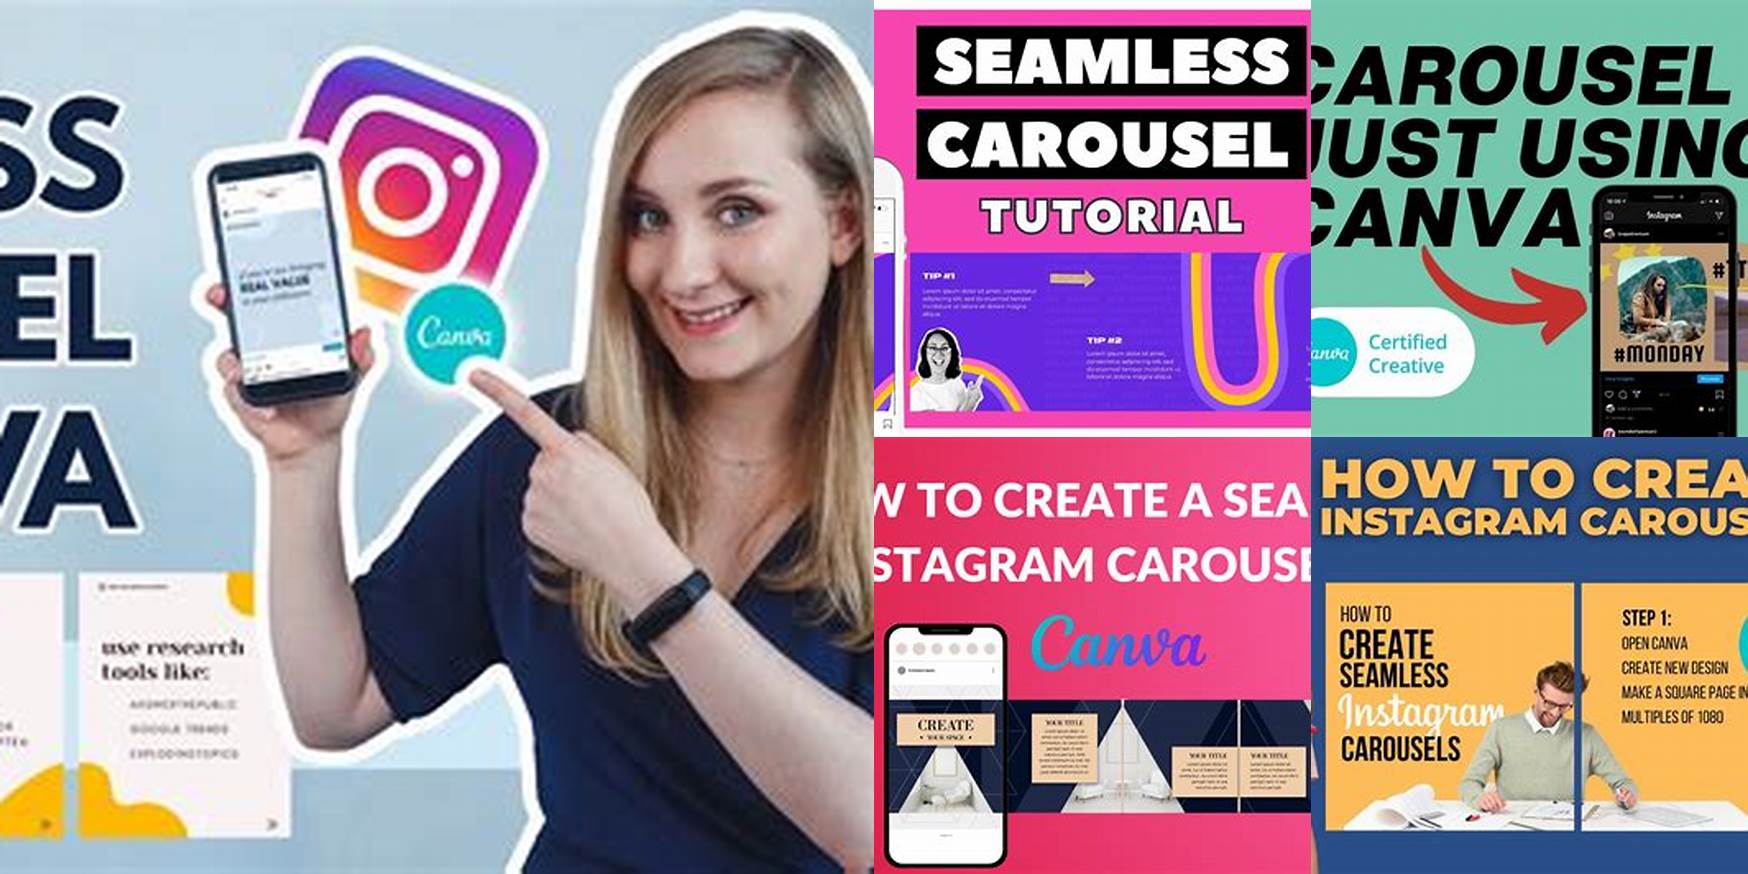 How To Make Instagram Carousel On Canva